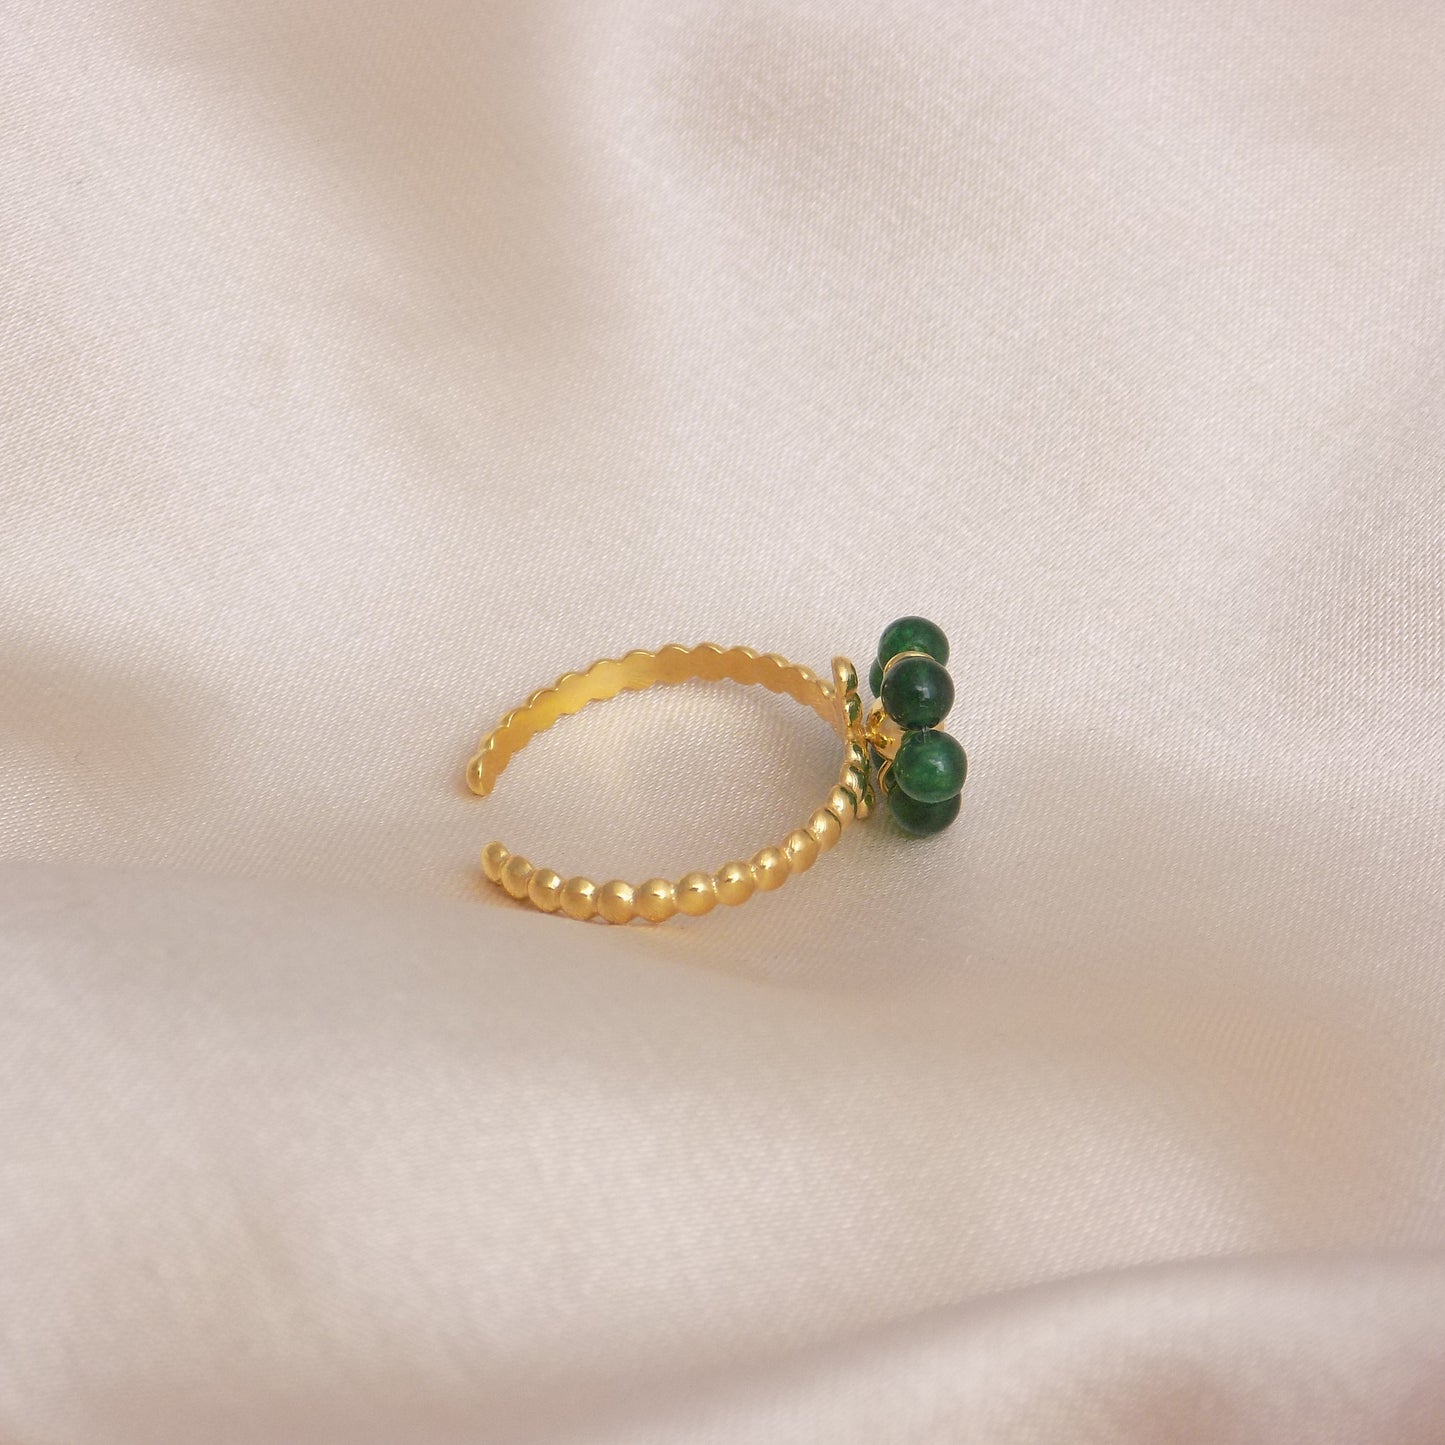 Green Beaded Flower Ring Adjustable 18K Gold Stainless Steel - Minimalist Jewelry